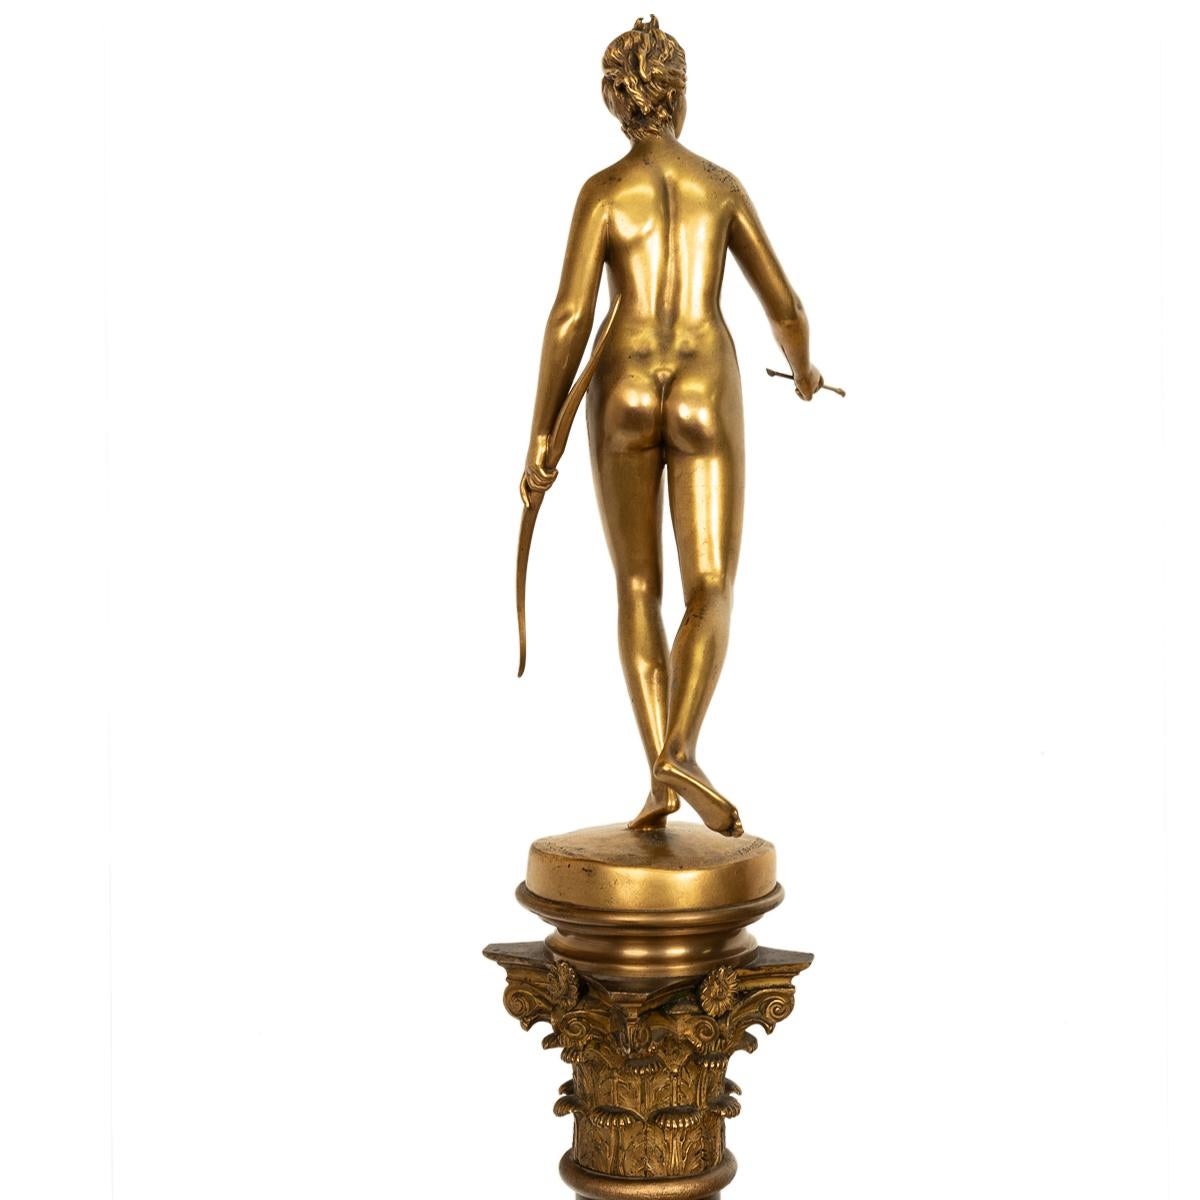 Antique French Grand Tour Gilt Bronze Statue on Column Diana the Huntress 1838 For Sale 3